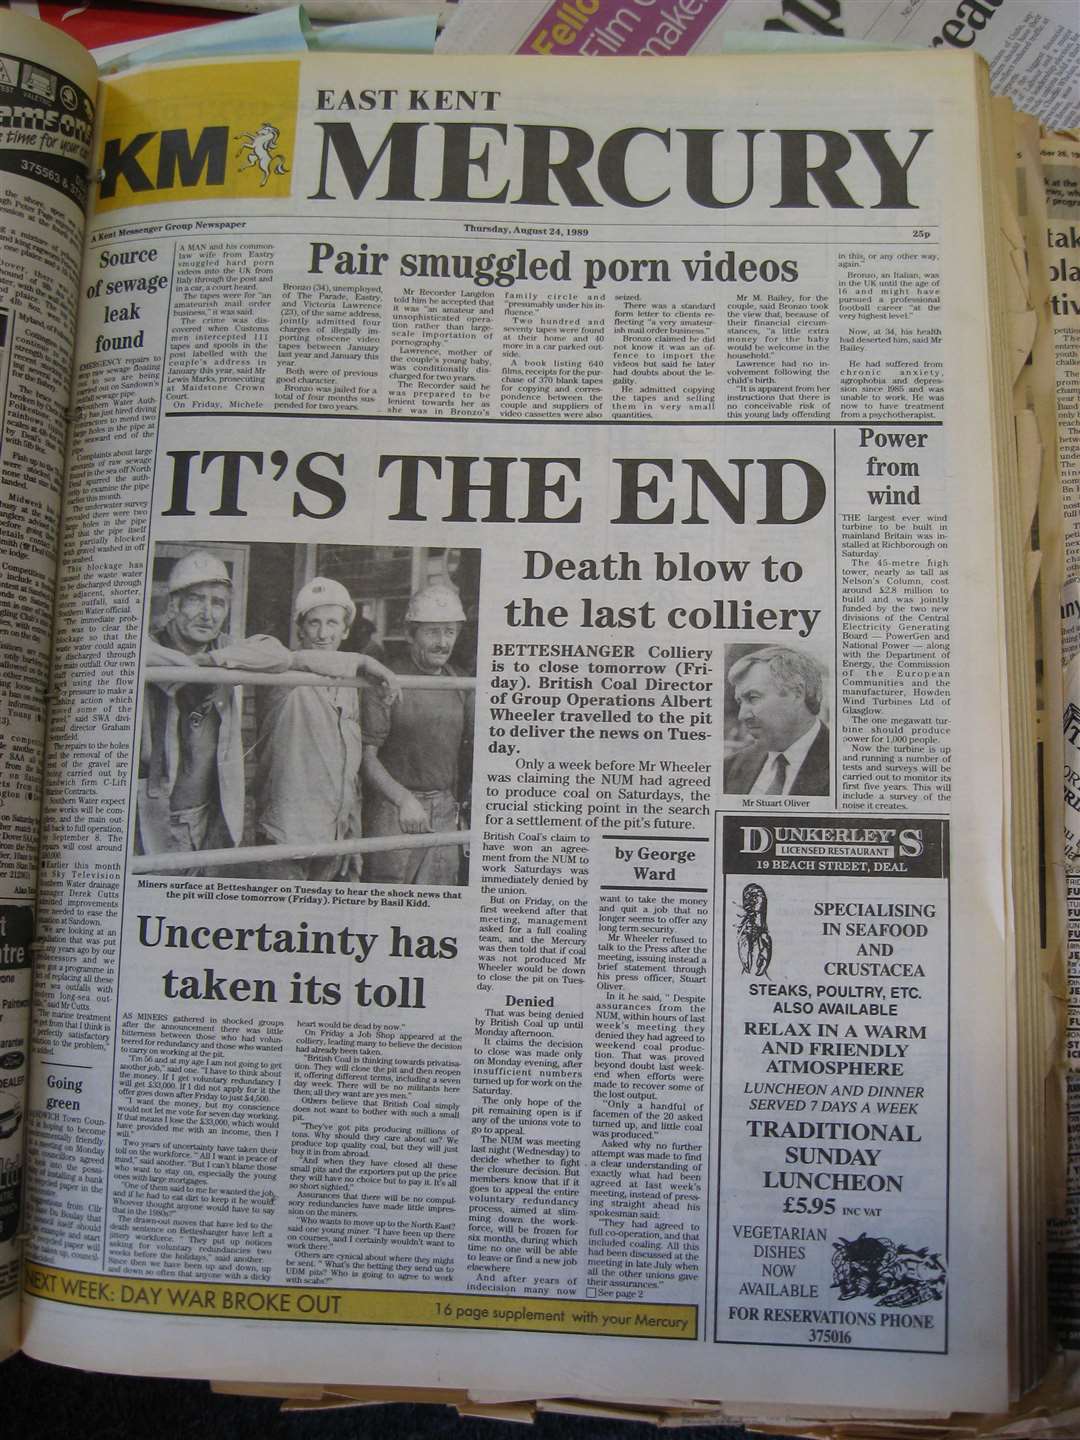 The East Kent Mercury pages that reported the decision to close Betteshanger Colliery and with it, the Kent Coalfield